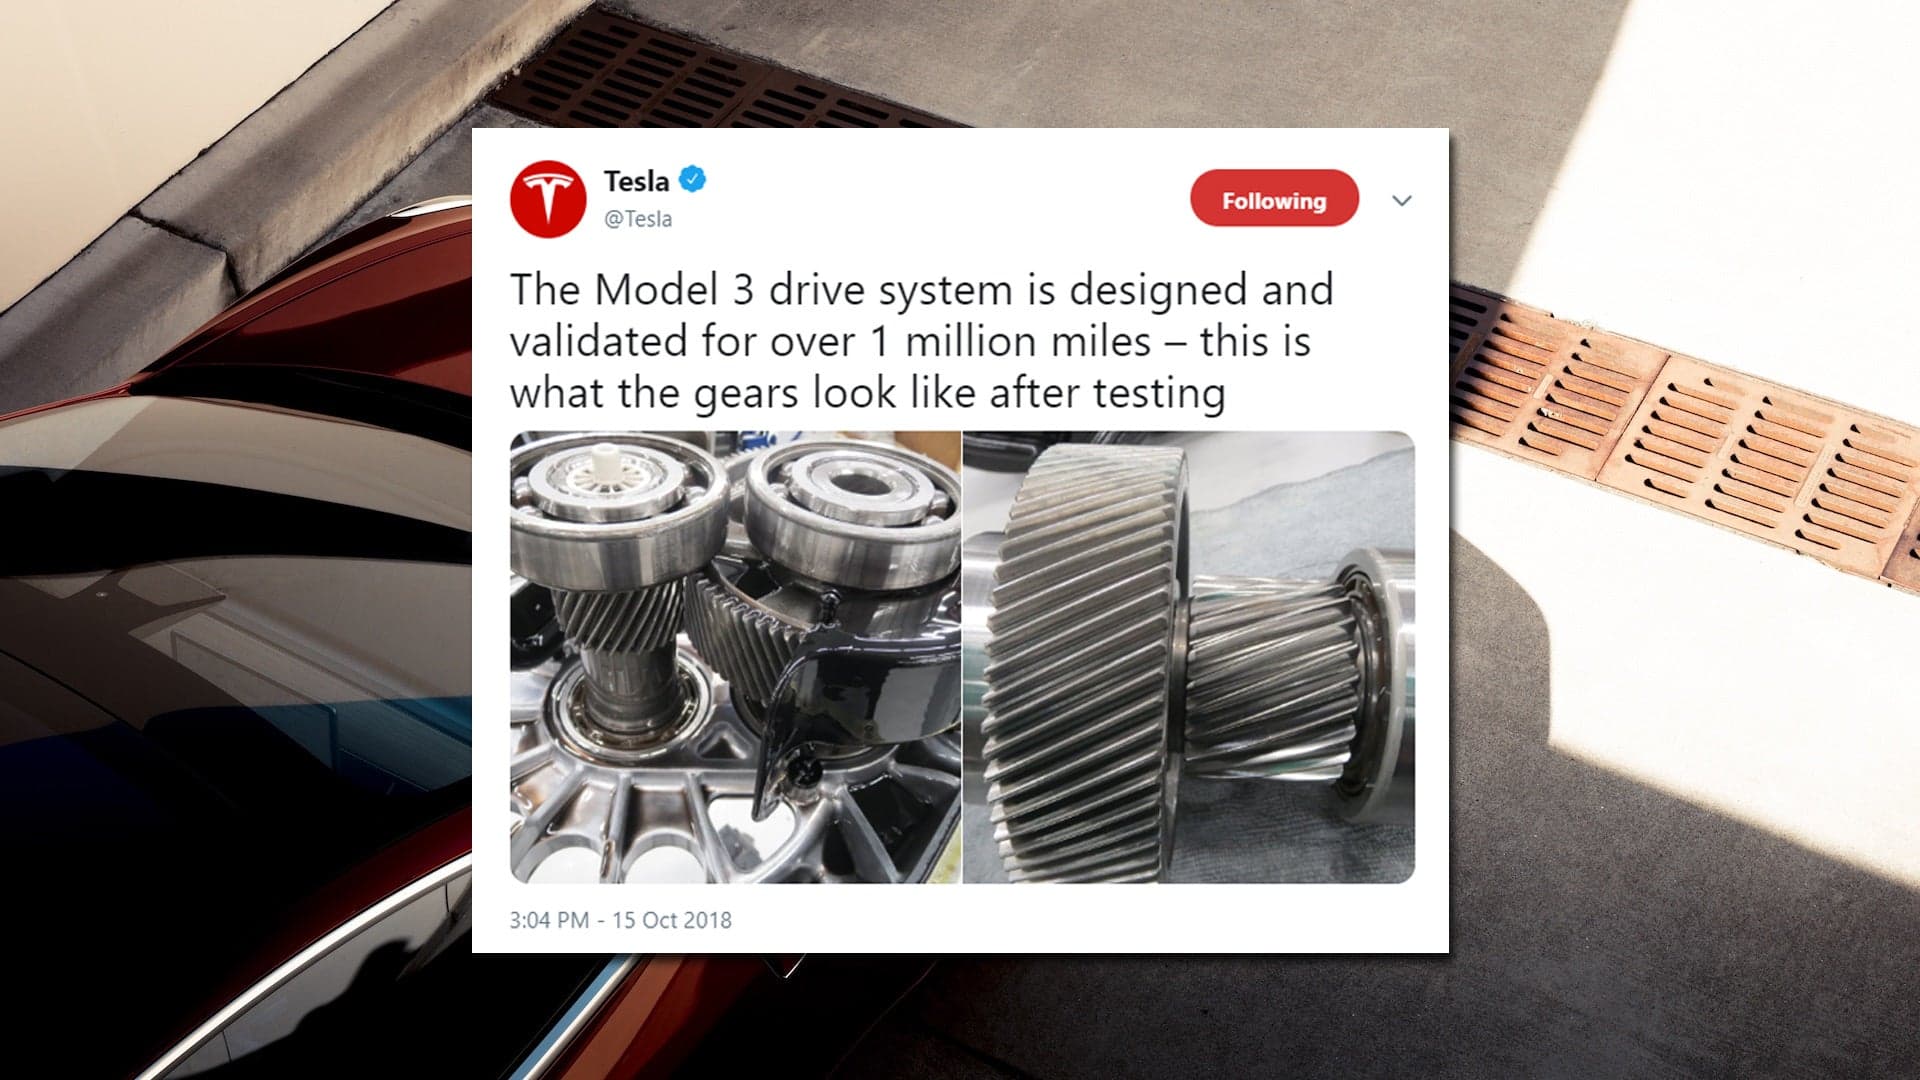 Tesla Shows off Model 3 Drive Unit After One Million Miles of Driving